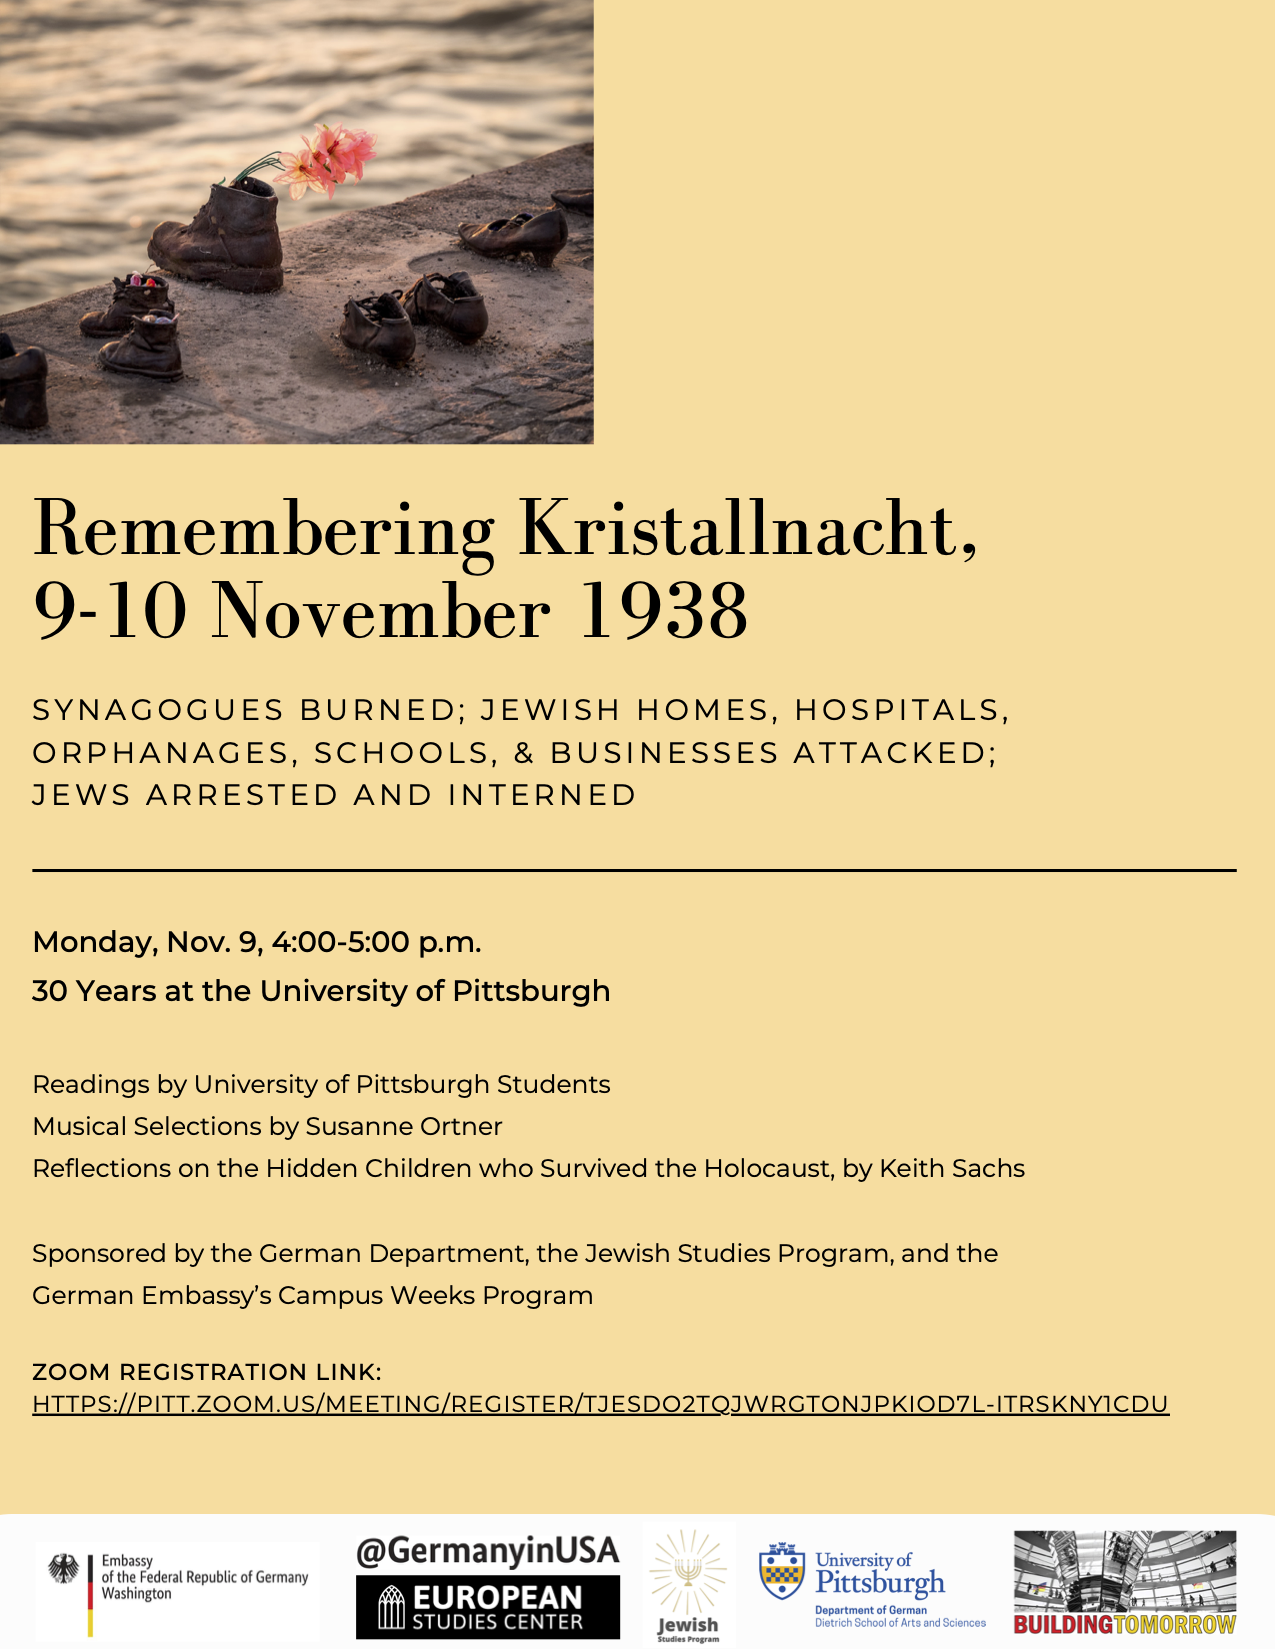 Remembering Kristallnacht, 9-10 November 1930: Synagogues burned; Jewish homes, Hospitals,  orphanages, schools, and businesses attached, jews arrested and interned; Monday Nov. 9 4-5pm: 30 Years at the University of Pittsburgh;  Readings by University of Pittsburgh Students Musical Selections by Susanne Ortner Reflections on the Hidden Children who Survived the Holocaust, by Keith Sachs Sponsored by the German Department, the Jewish Studies Program, and the German Embassy’s Campus Weeks Program; ZOOM REGISTRATION LINK: HTTPS://PITT.ZOOM.US/MEETING/REGISTER/TJESDO2TQJWRGTONJPKIOD7L-ITRSKNY1CDU  ;  This flyer has a cream background with an image of children's shoes depicted, commemorating victims. 